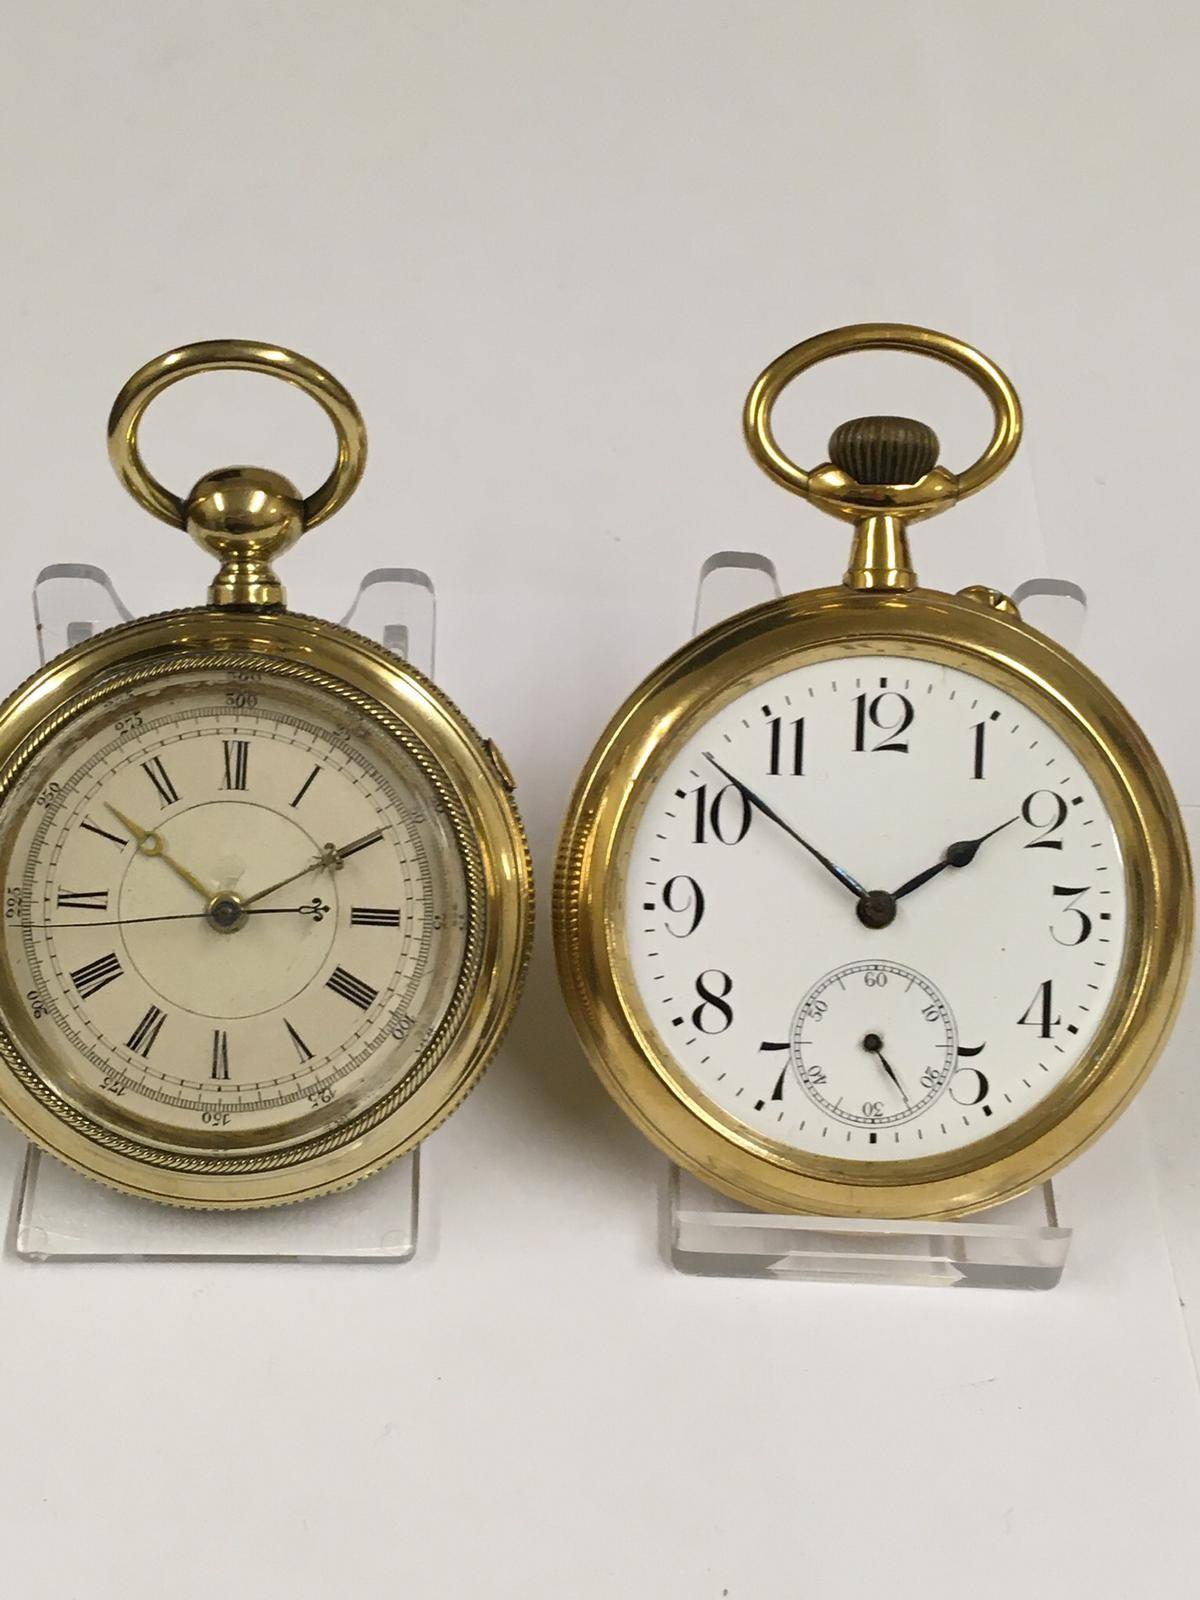 Antique Goliath pocket watch and very large antique Chronograph pocket watch (2) - Image 10 of 11